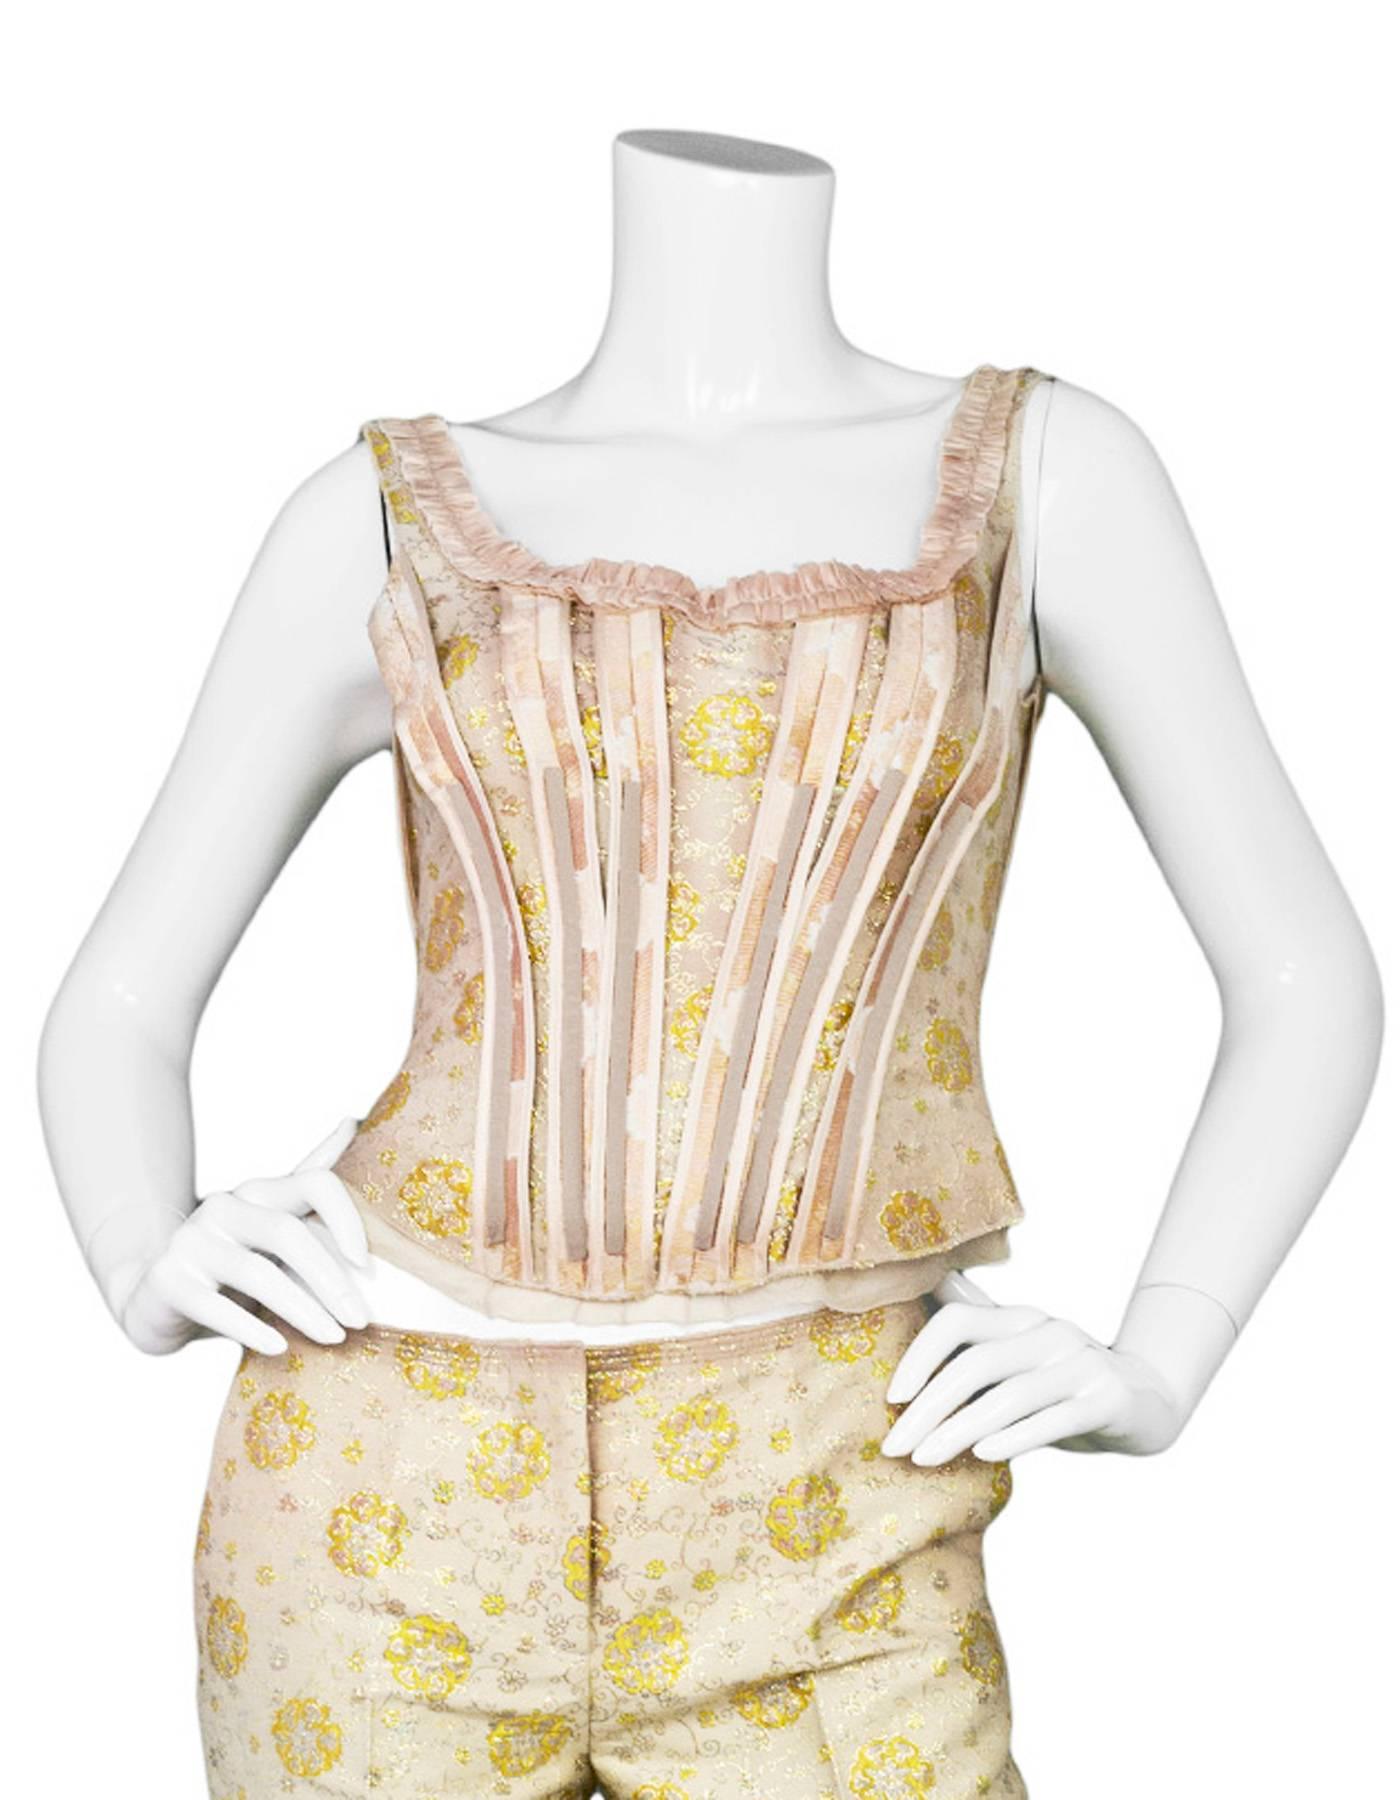 Prada Champagne & Gold Brocade Corset Top 

Made In: Italy
Color: Champagne, gold, pink, and yellow
Composition: 31% cotton, 24% acrylic, 17% silk, 15% acetate, 7% metal fibers, 6% nylon
Lining: Champagne, 55% silk, 45%